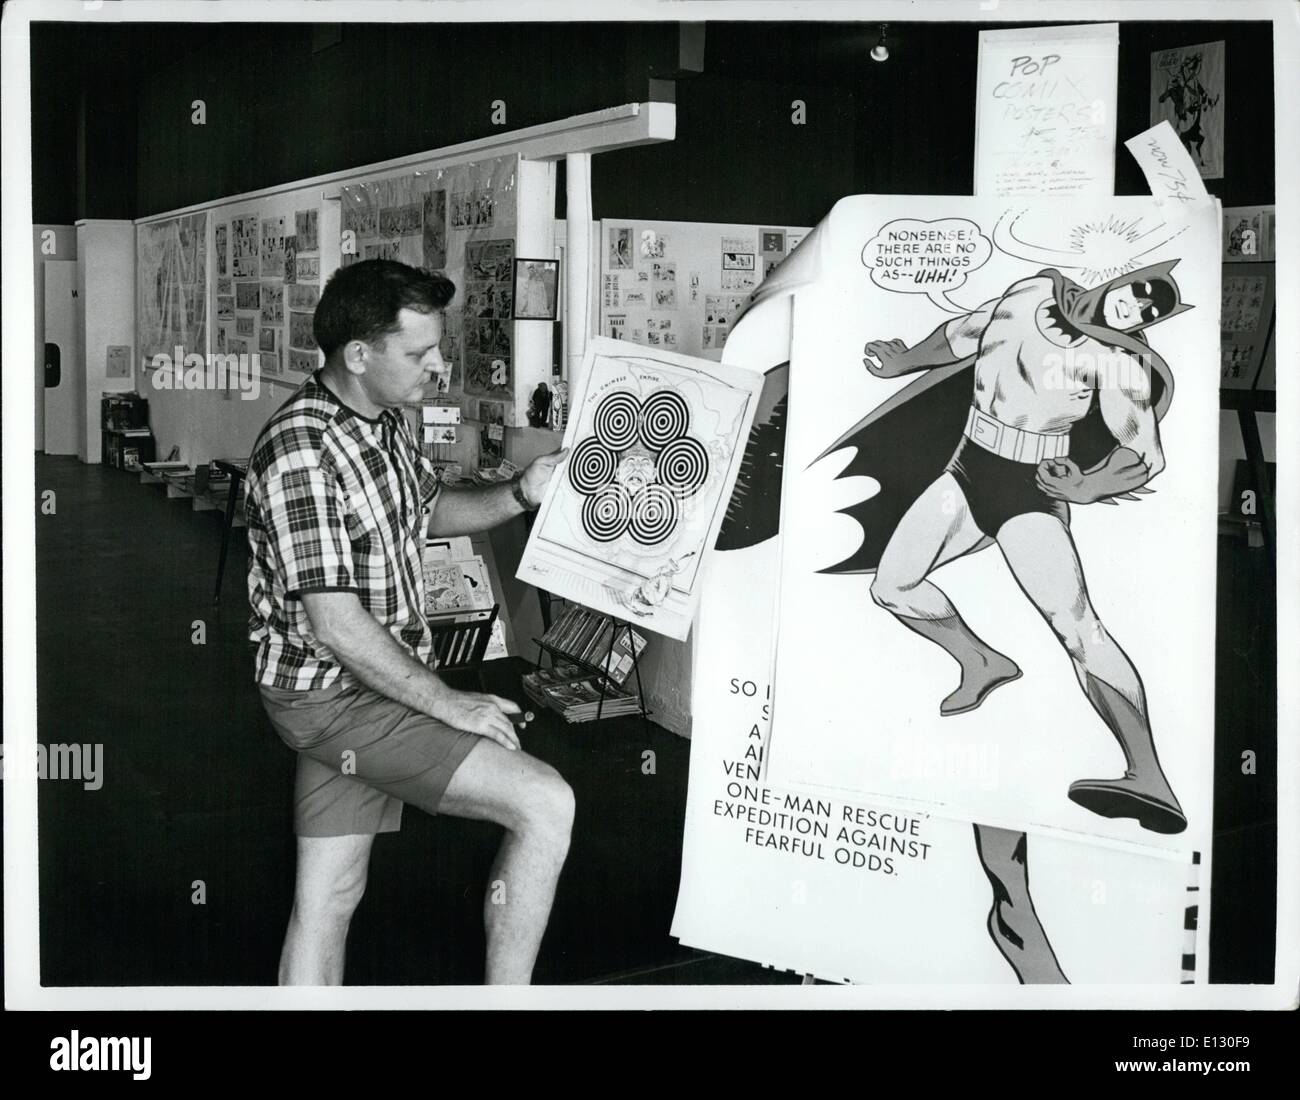 Feb. 26, 2012 - A poster of Batman by Bob Kane is viewed by Jim Ivey, owner of the Cartoon Museum, a new attraction that has opened at Madeira Beach on Florida's West Coast. The unusual museum has displays of original drawings of famous cartoonists from Ivey's collection of 2,500 works. Stock Photo